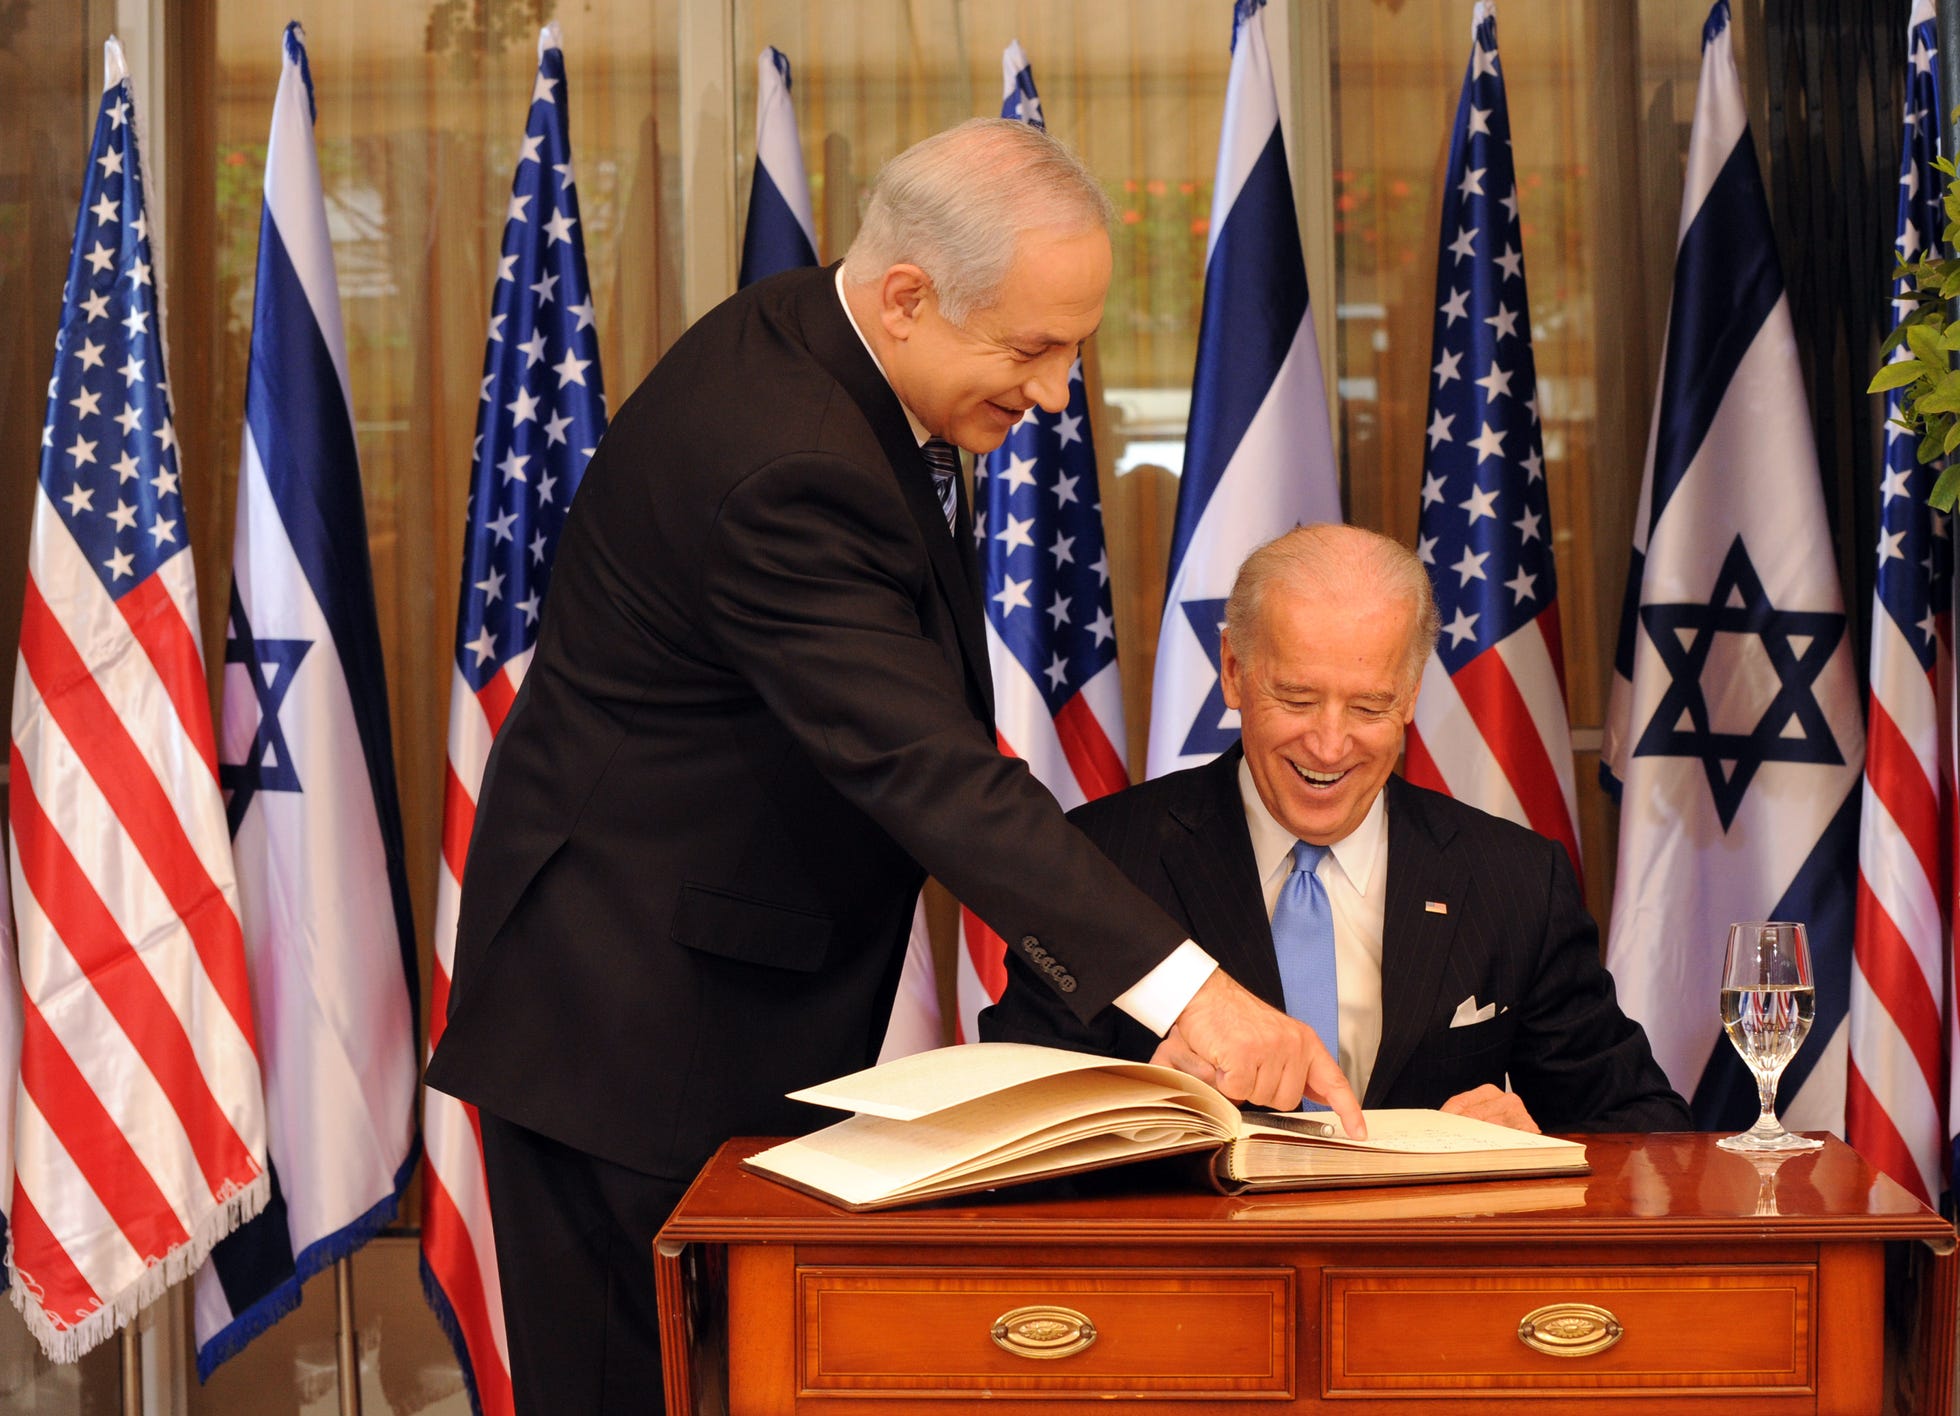 biden-and-netanyahu-s-decadeslong-relationship-tested-by-new-crisis